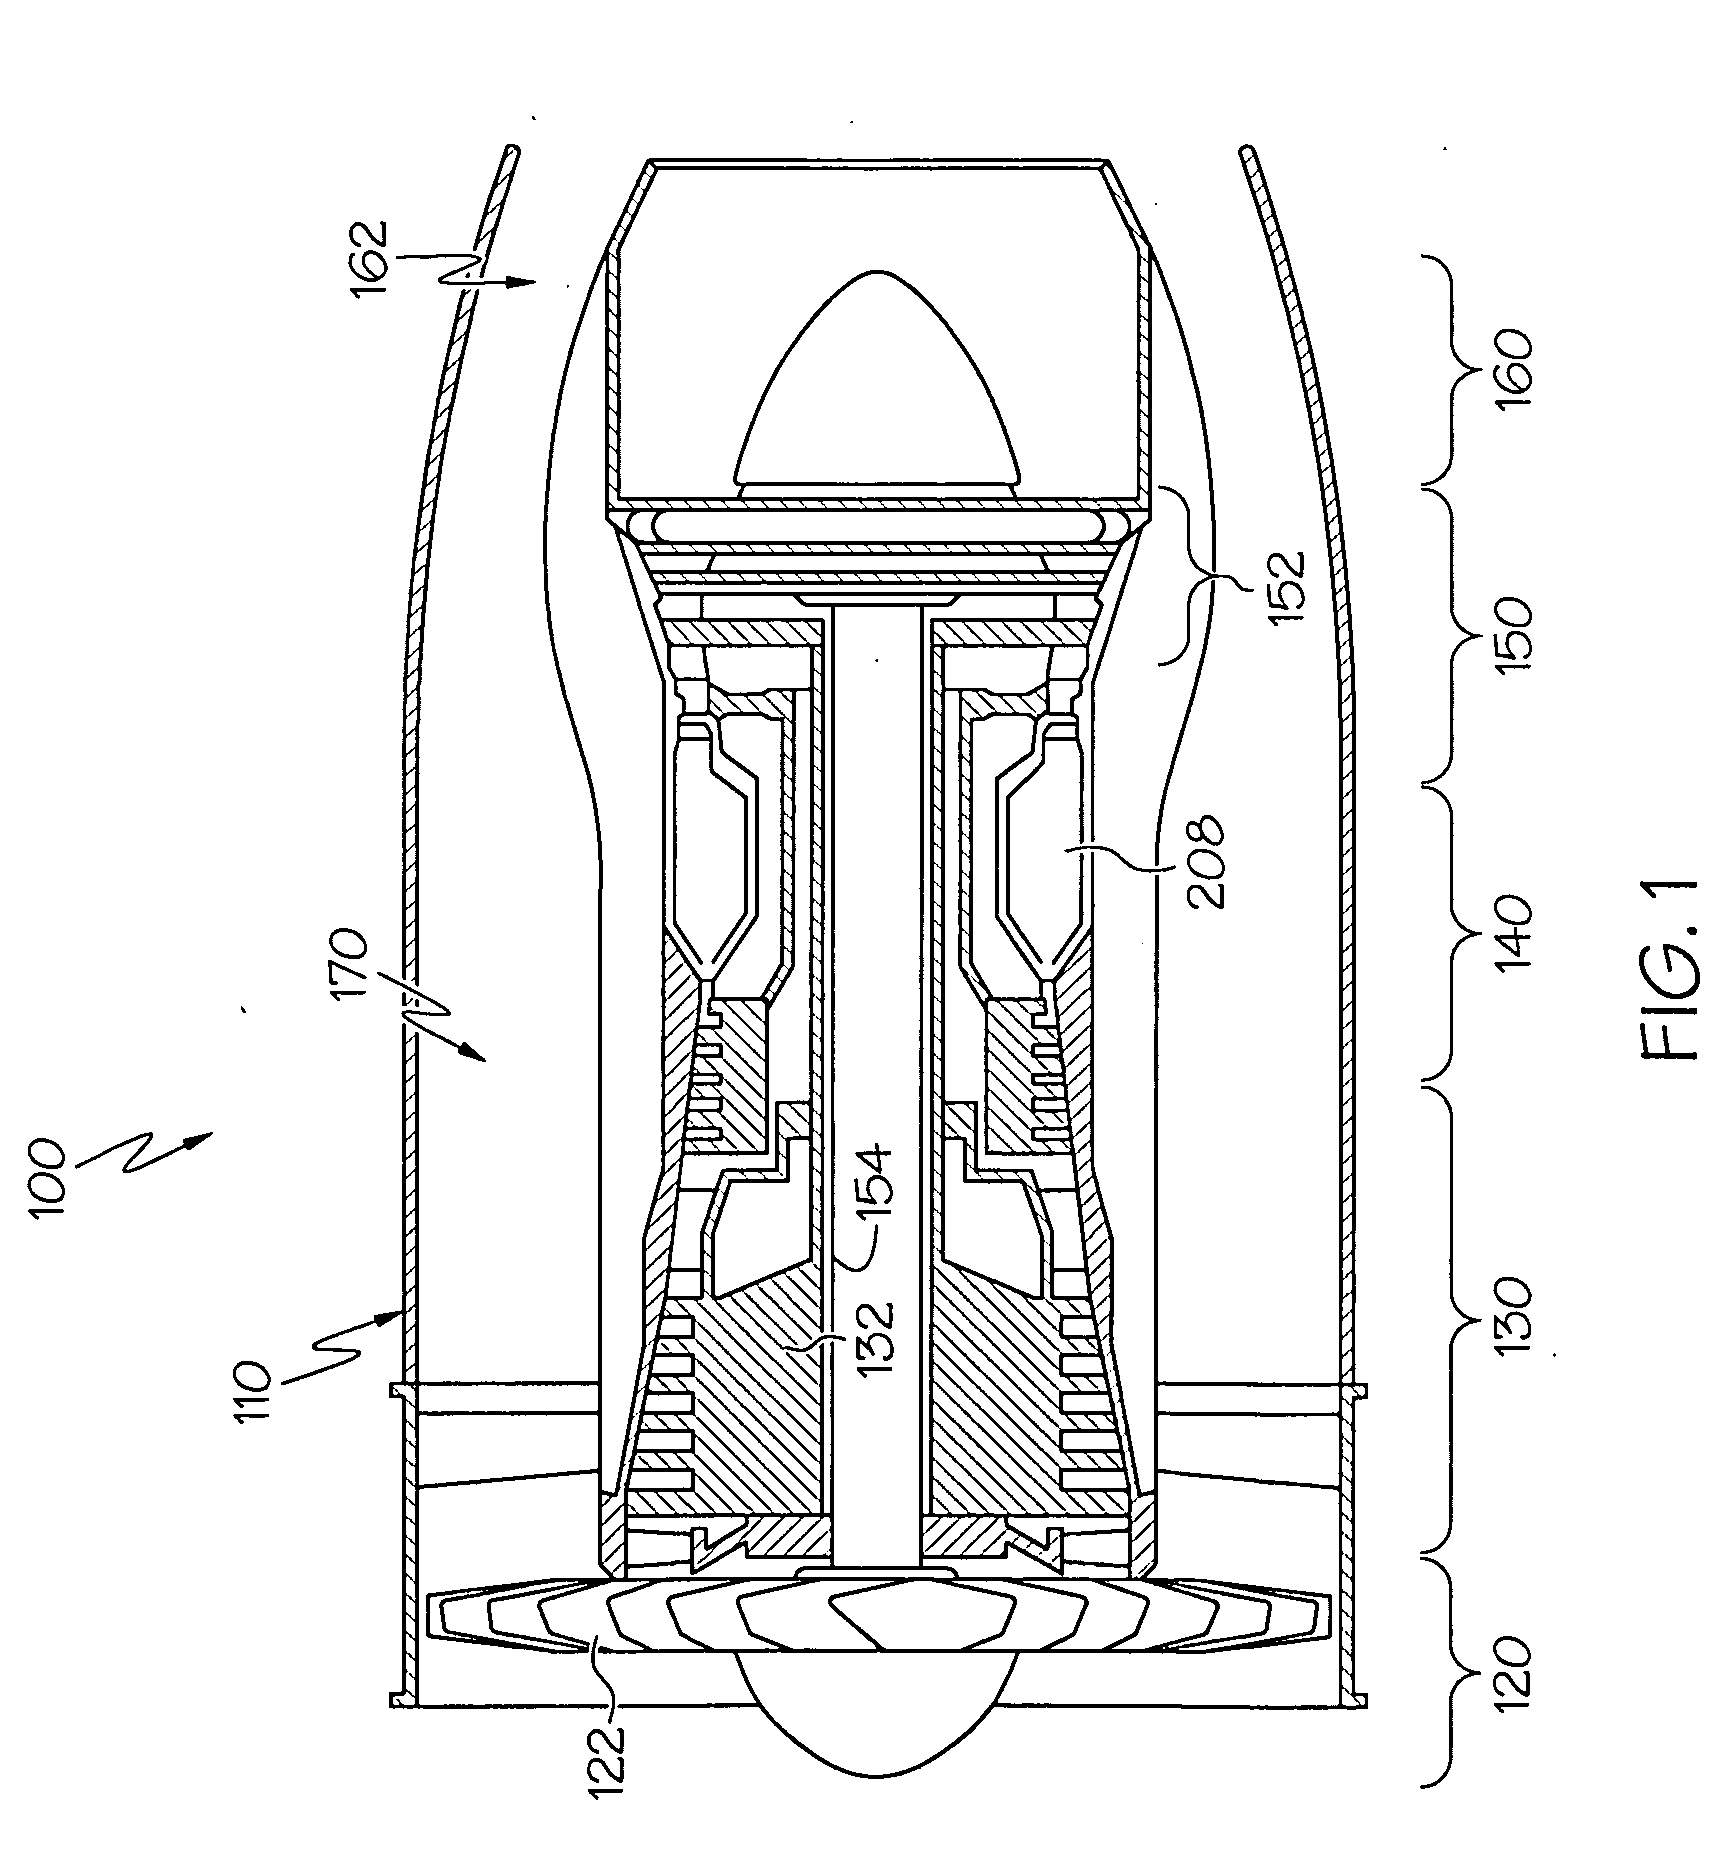 Dual walled combustors with impingement cooled igniters